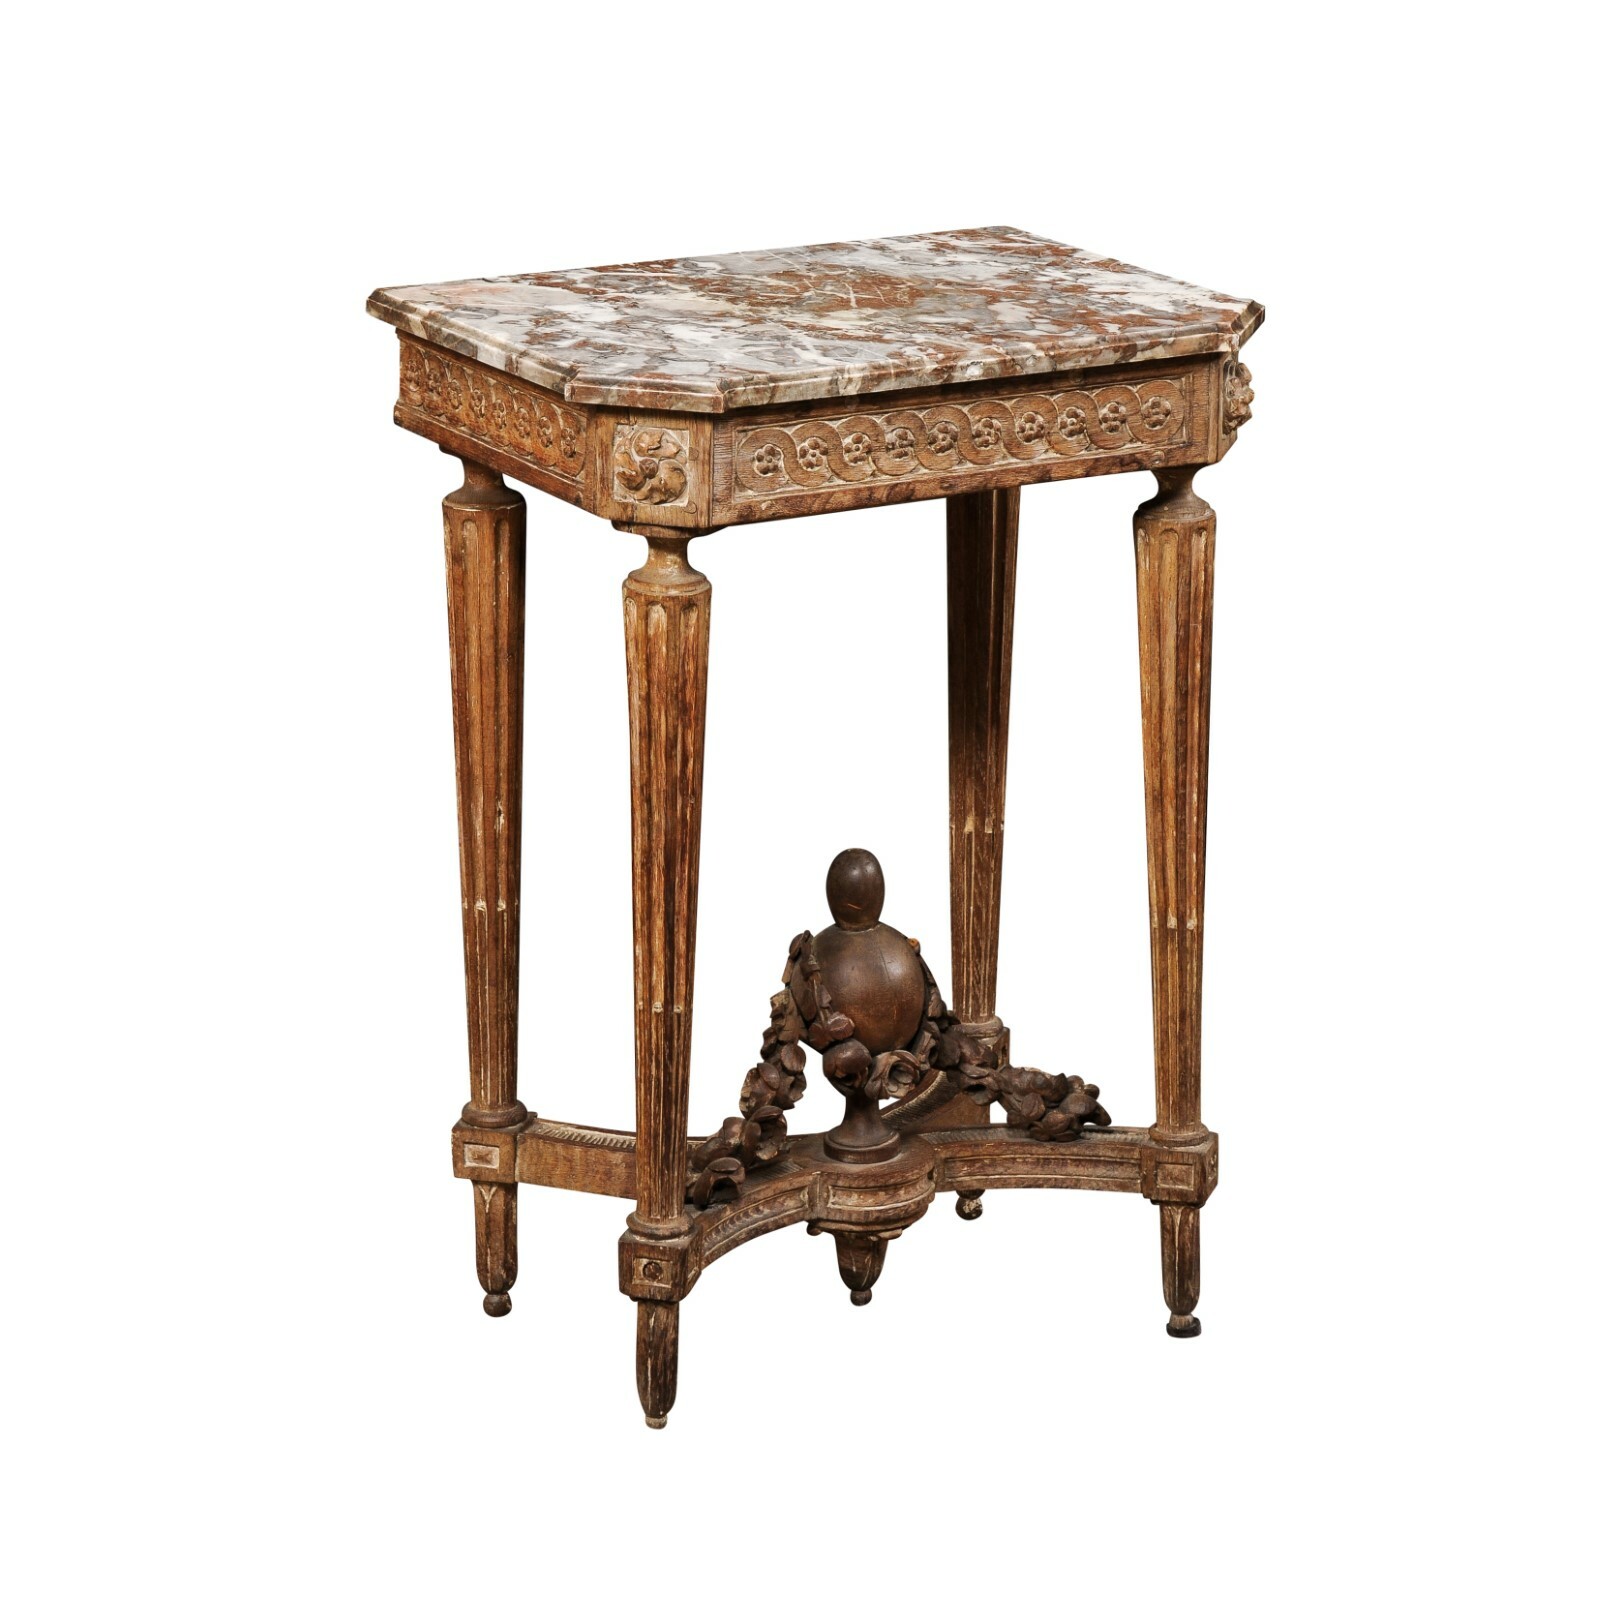 Late 18th c. French Marble Top Side Table